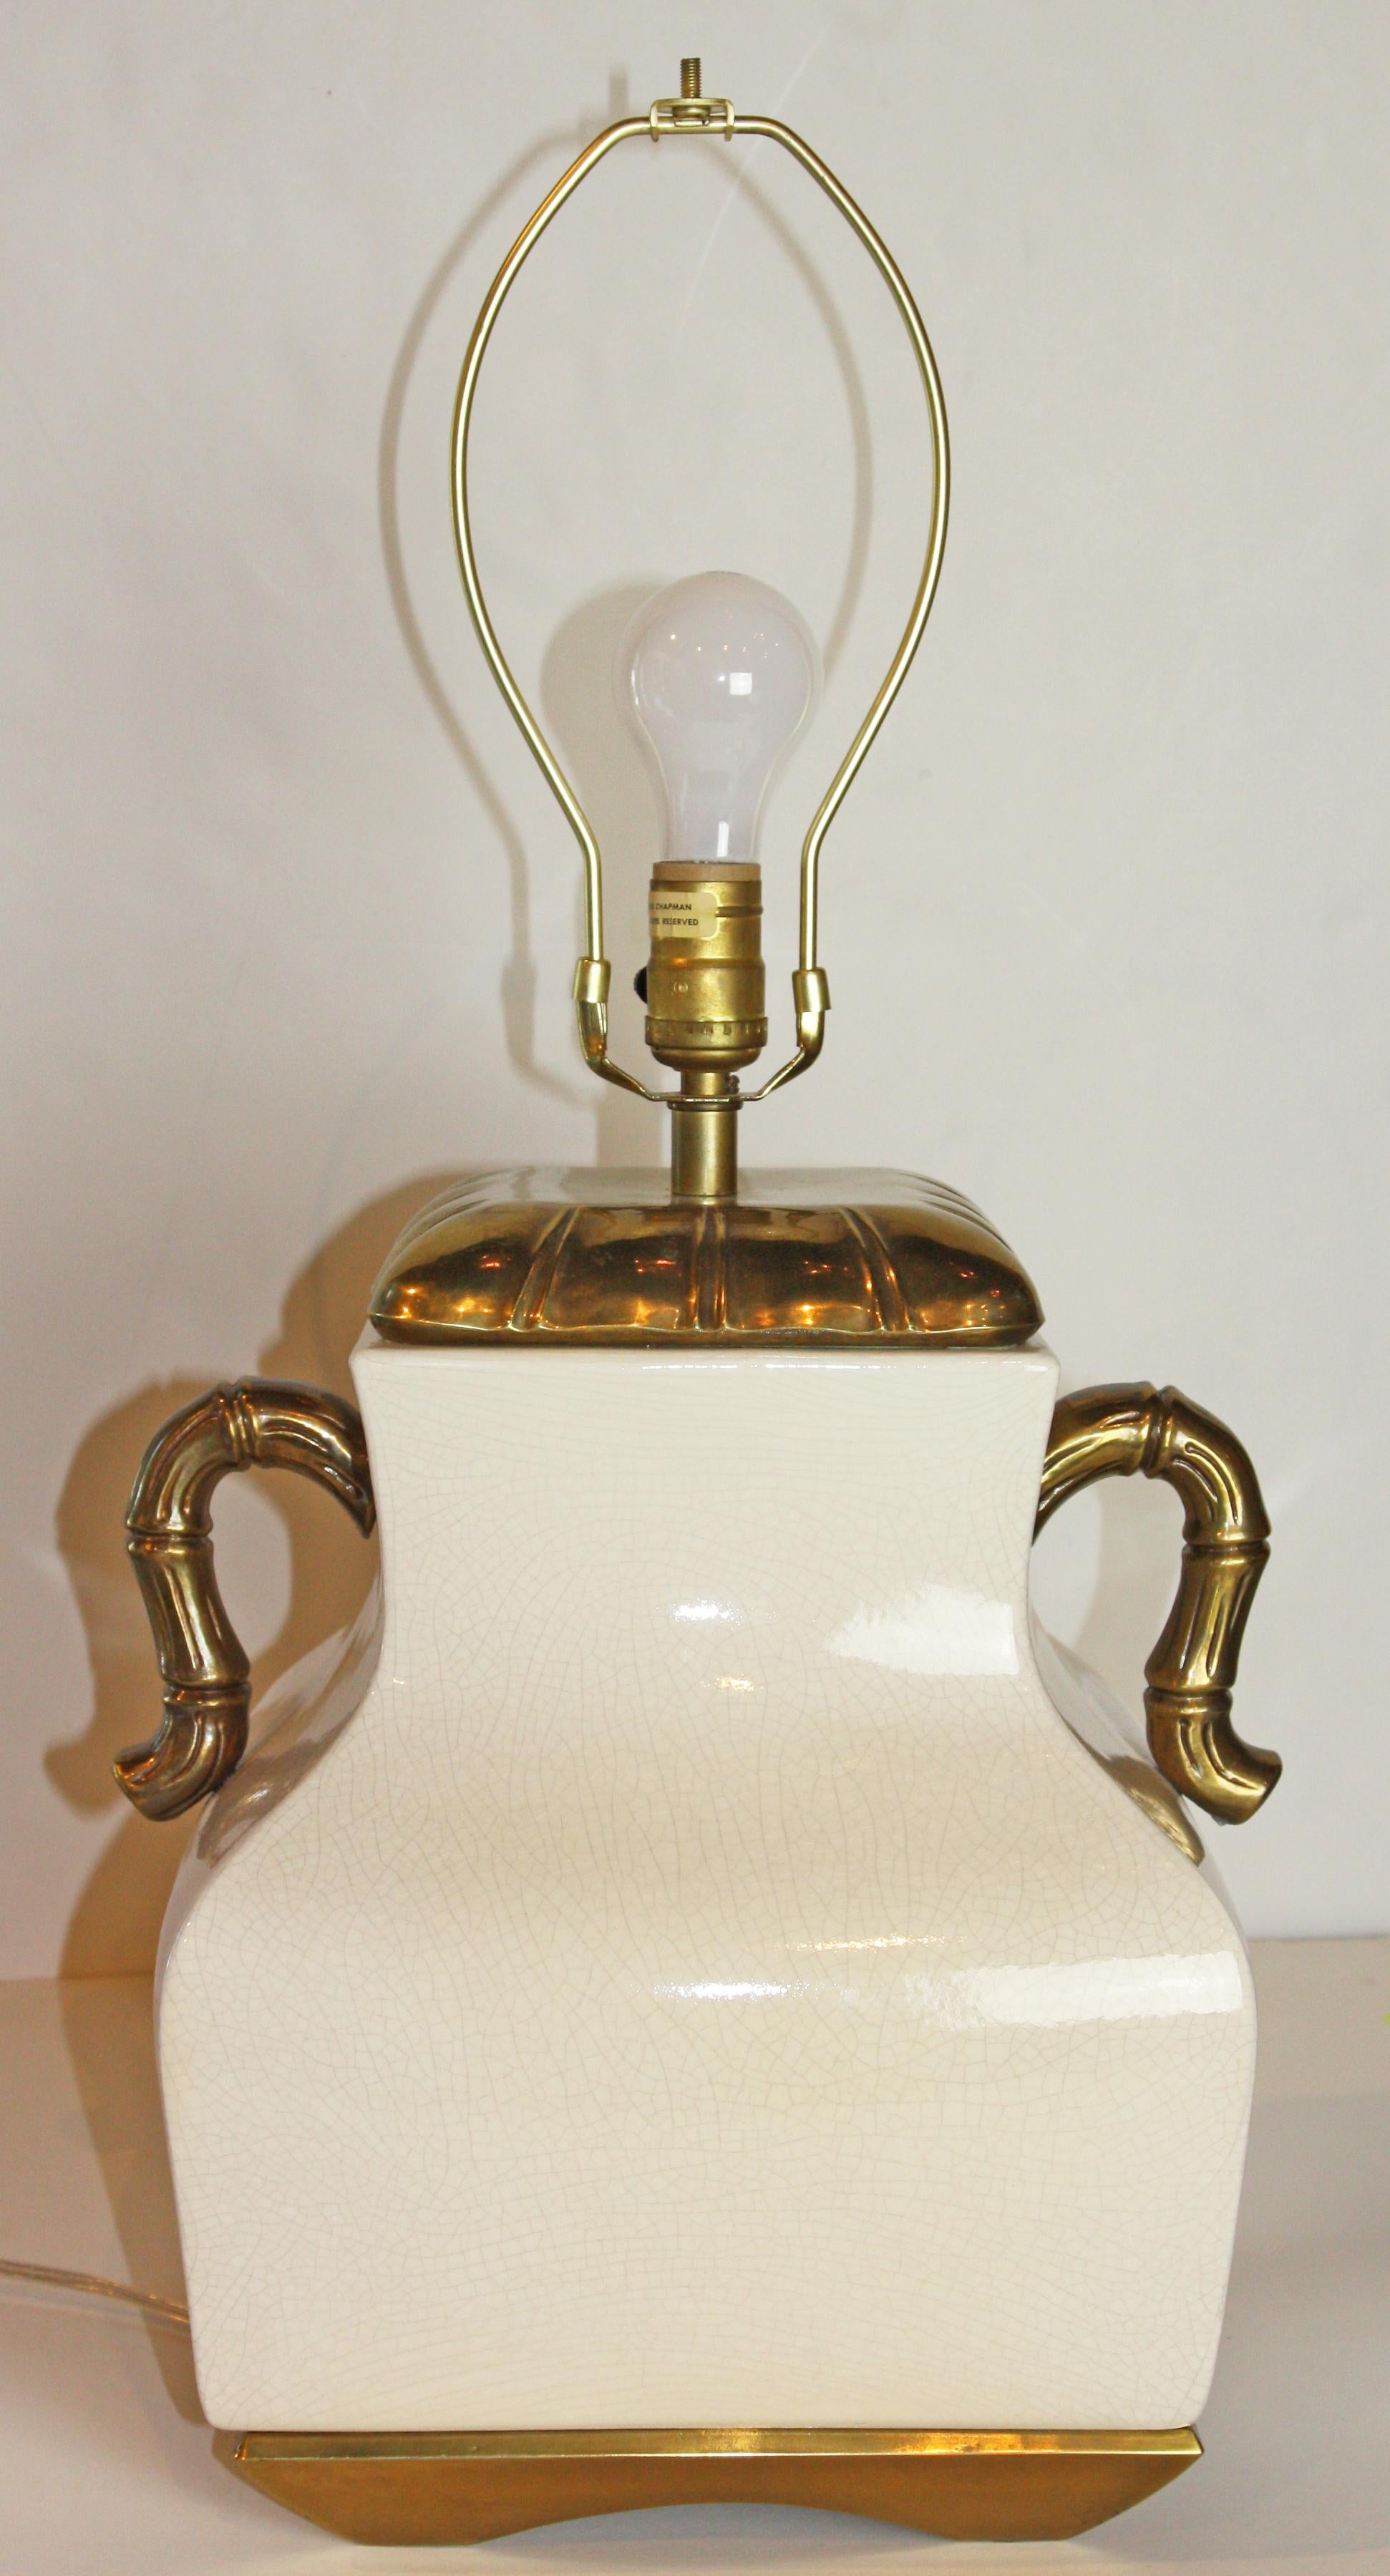 A vintage Chapman, double-handled, urn lamp in a white crackle glaze. Included is a large, unique, hexagonal shade (diameter 16.5